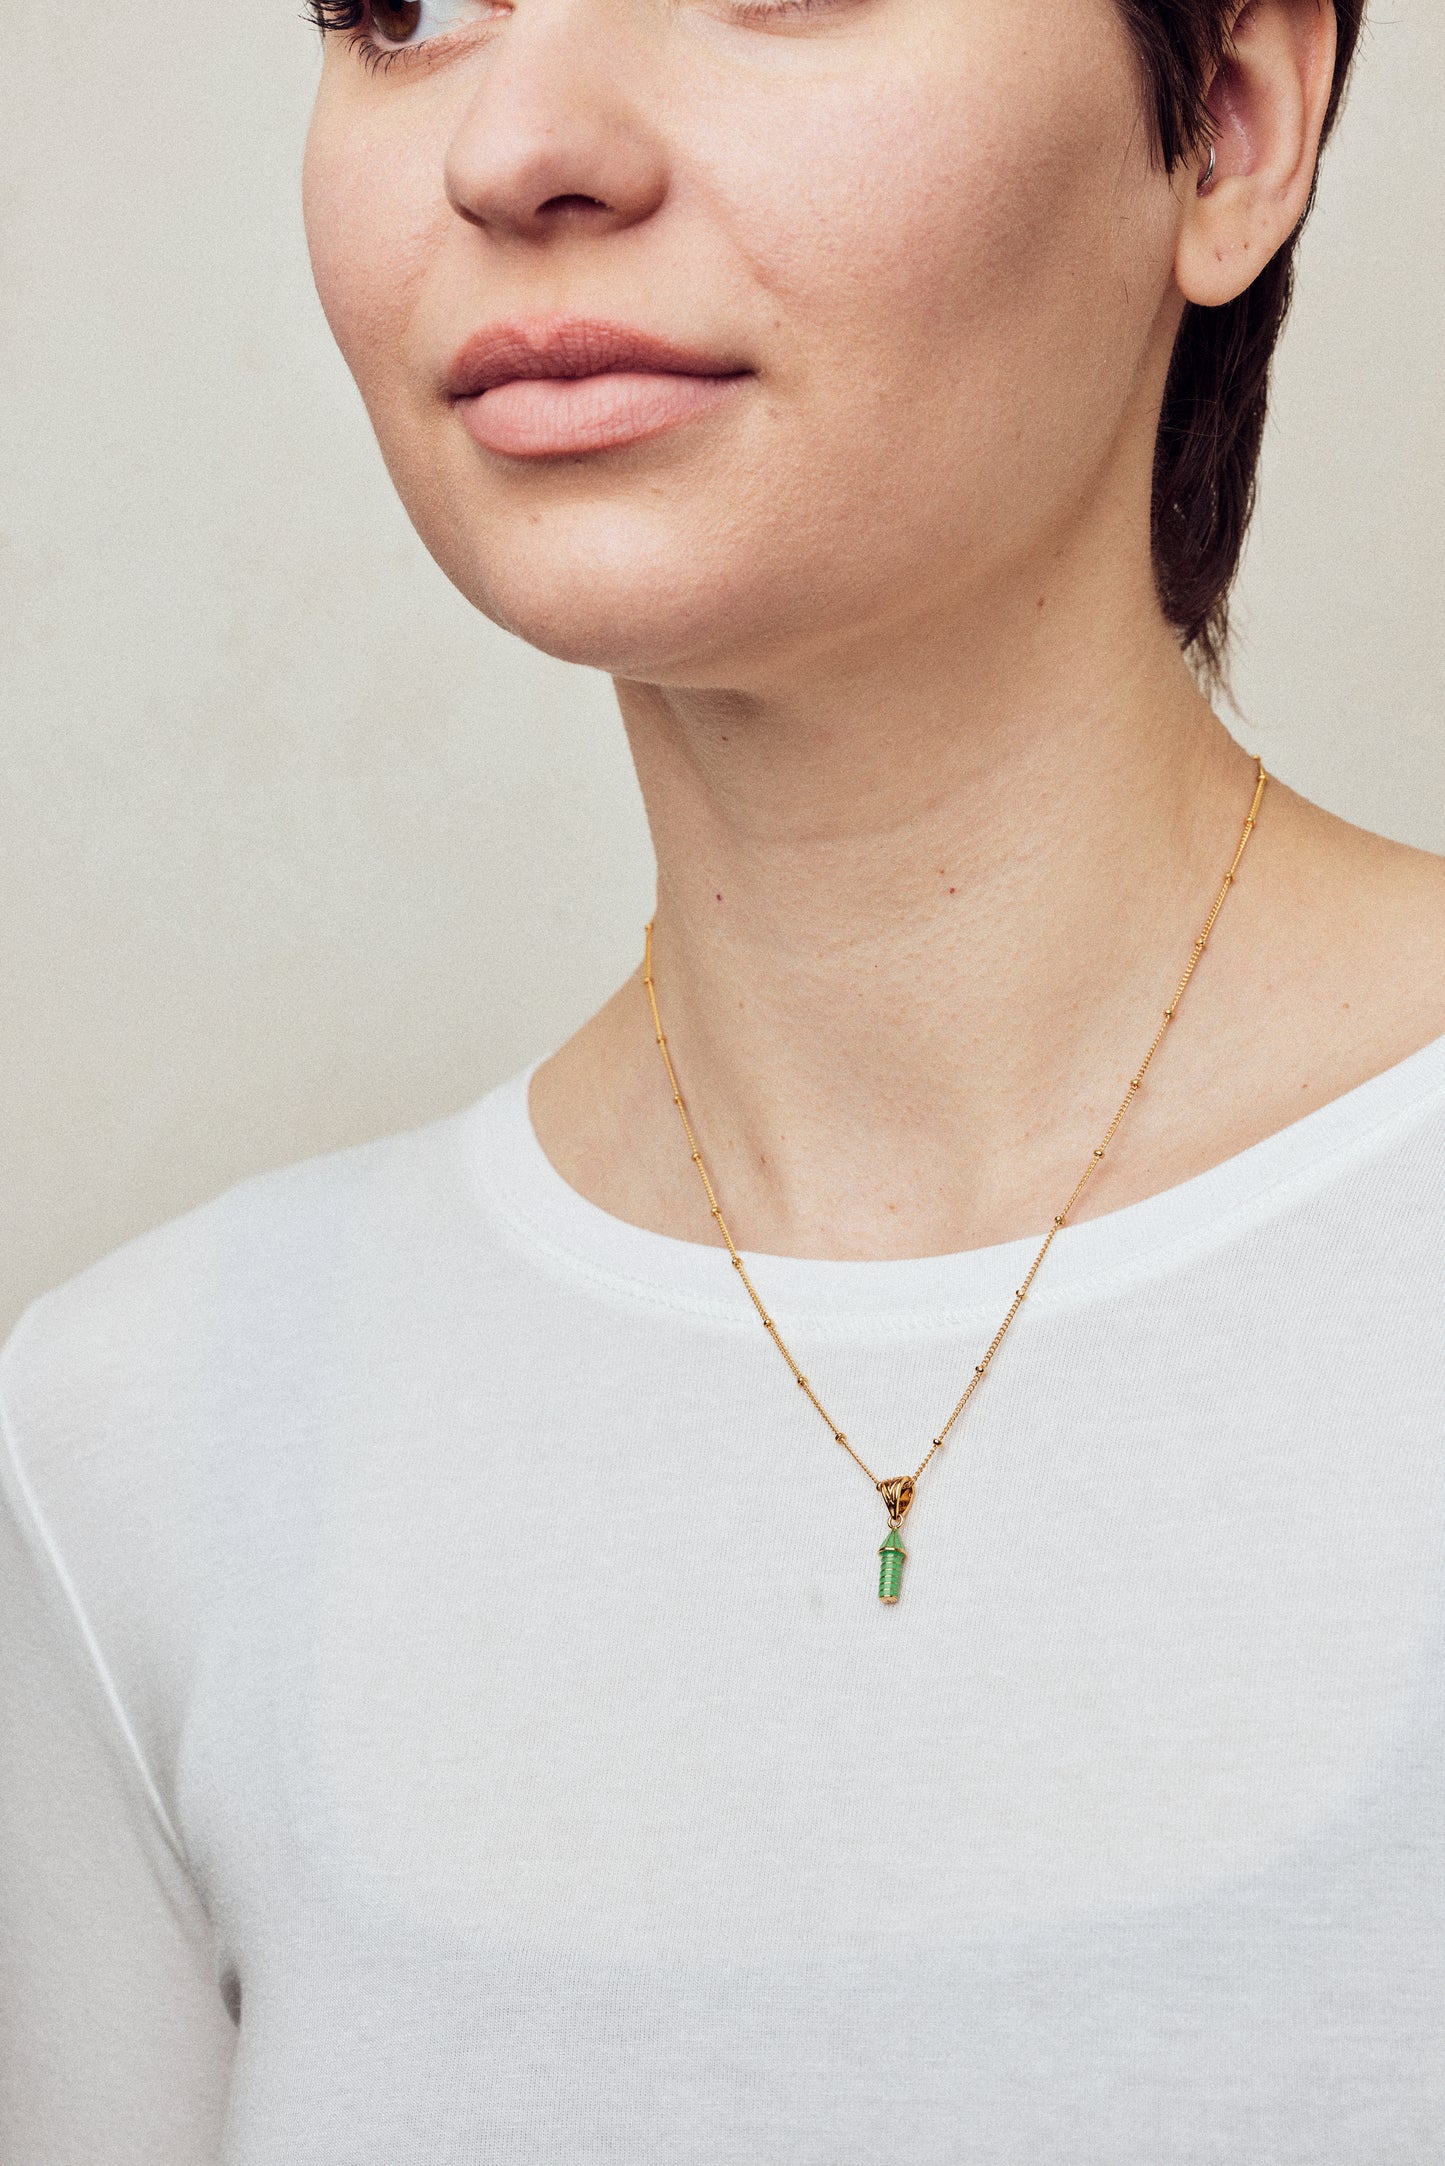 image of rocket enamel necklace on model with short brown hair wearing white top